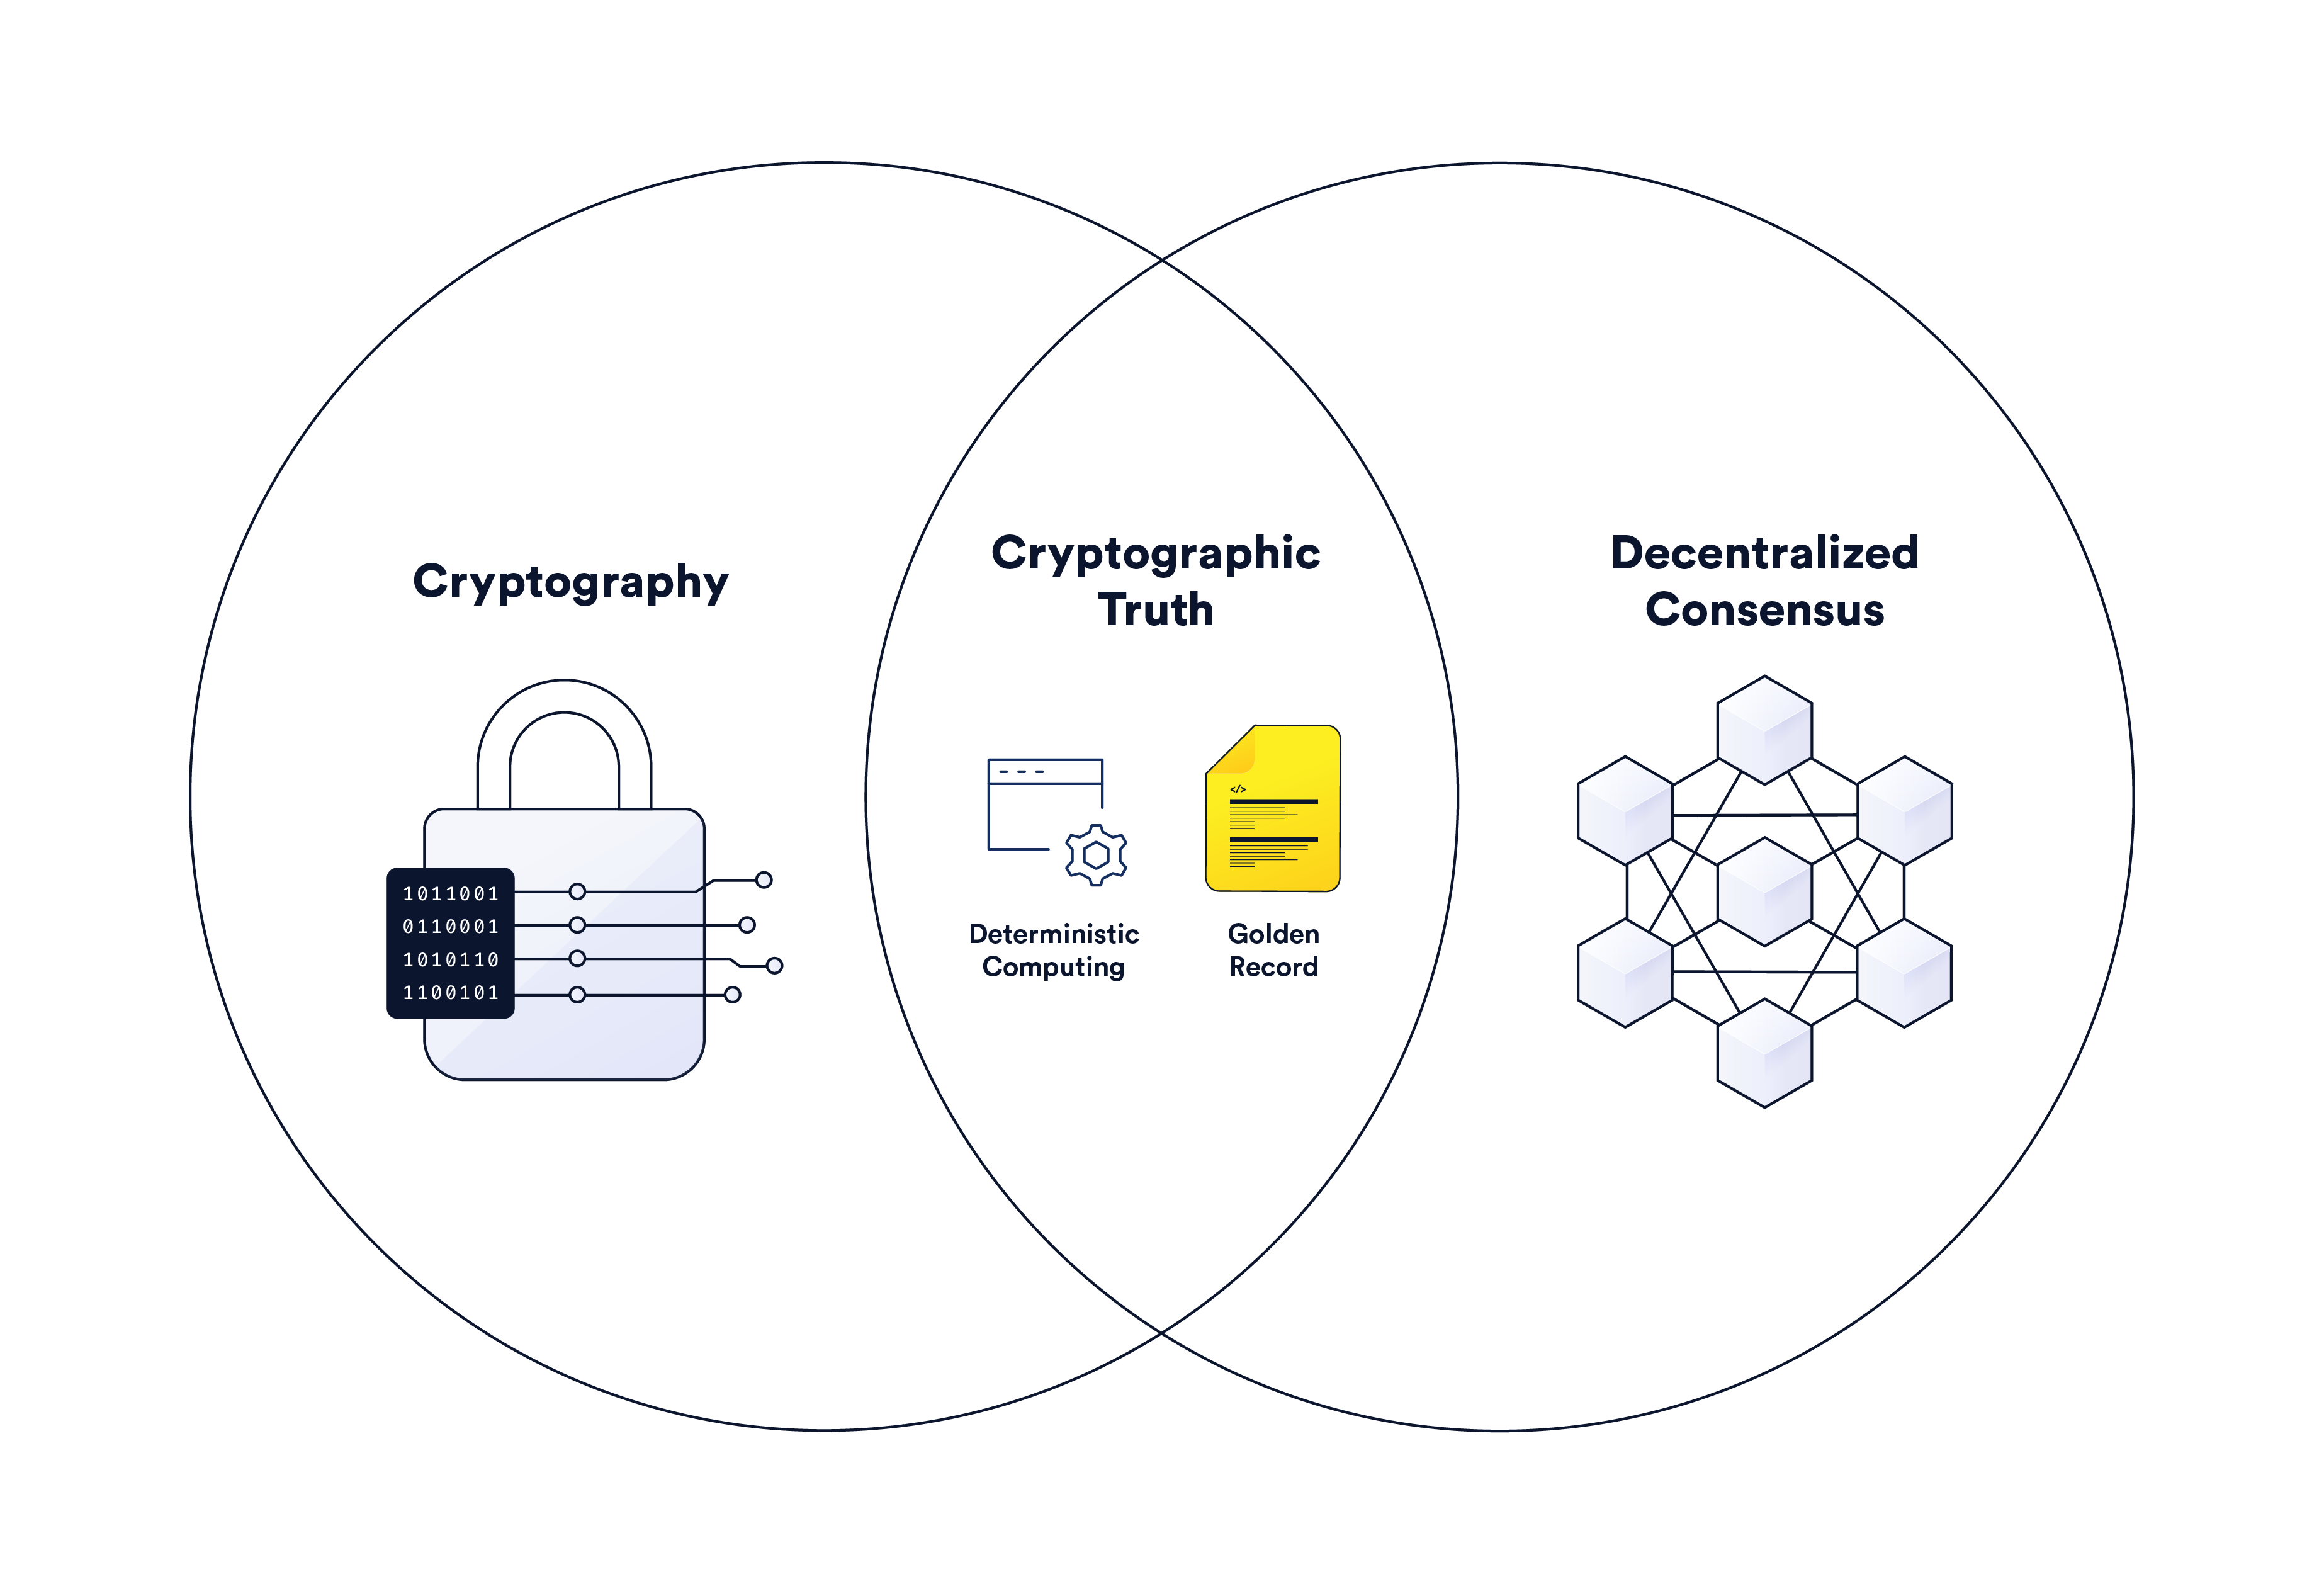 Cryptographic Truth